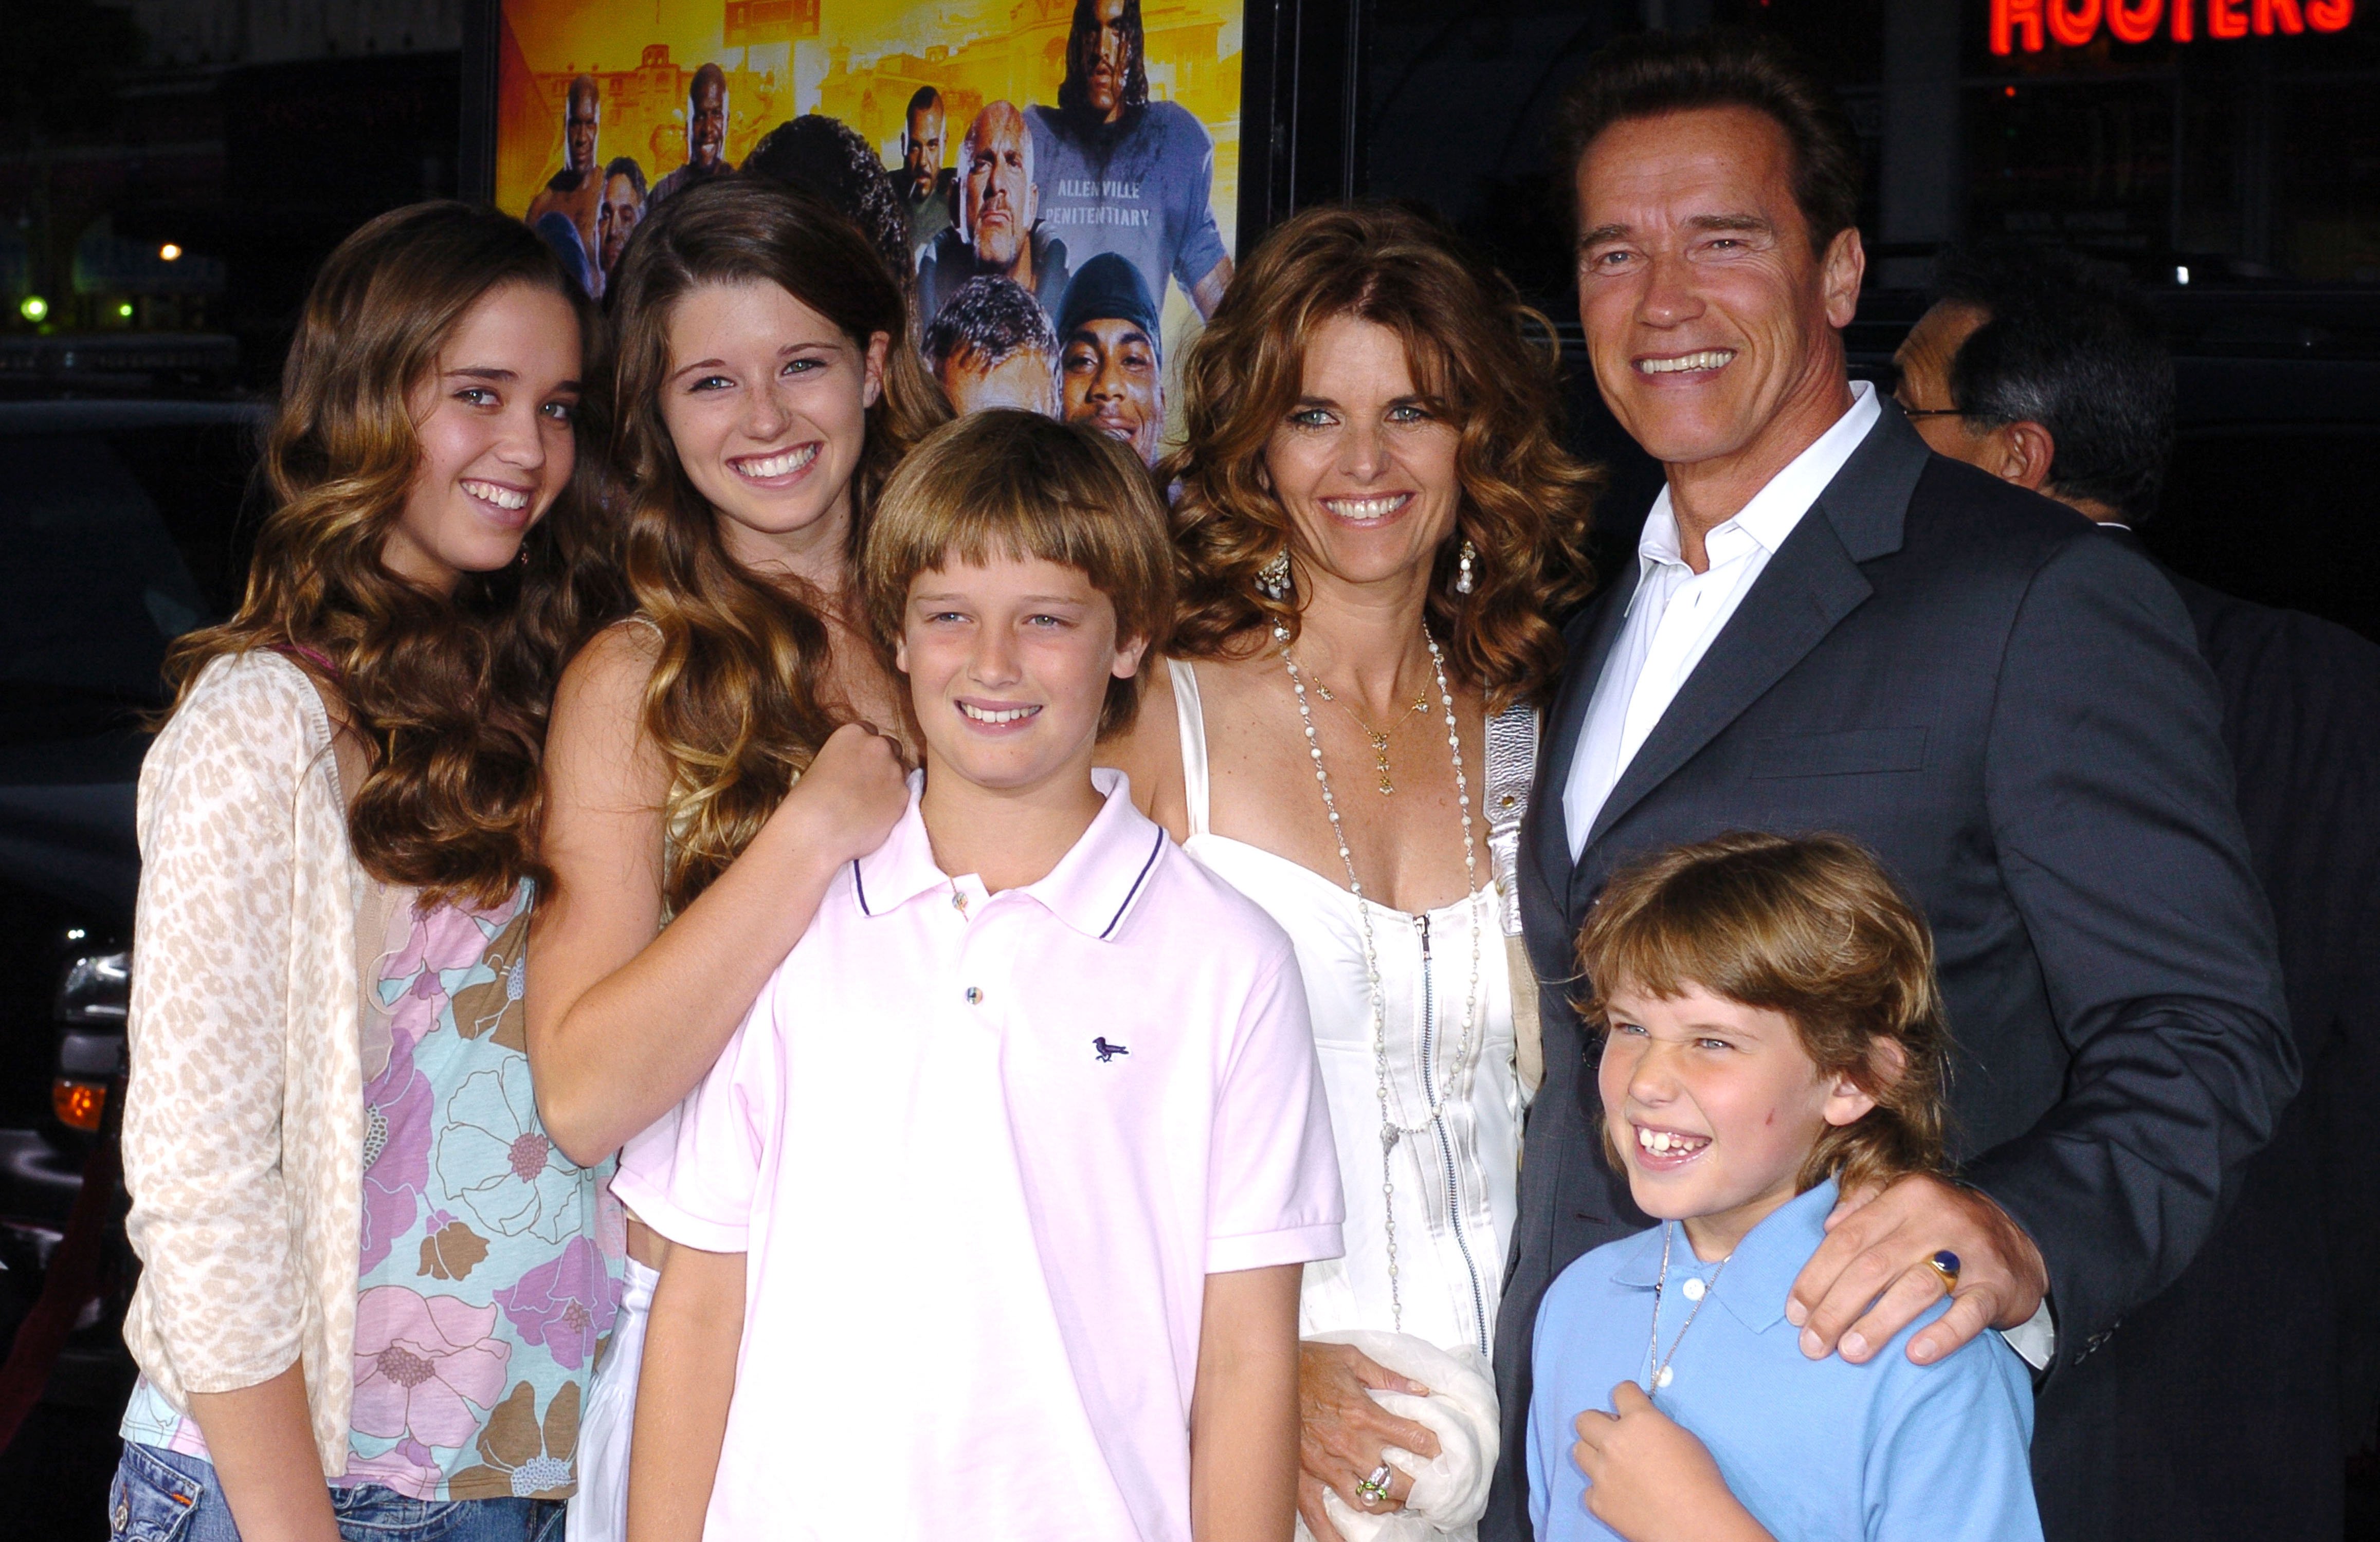 Arnold Schwarzenegger, his wife, Maria Shriver, and his family. | Source: Getty Images